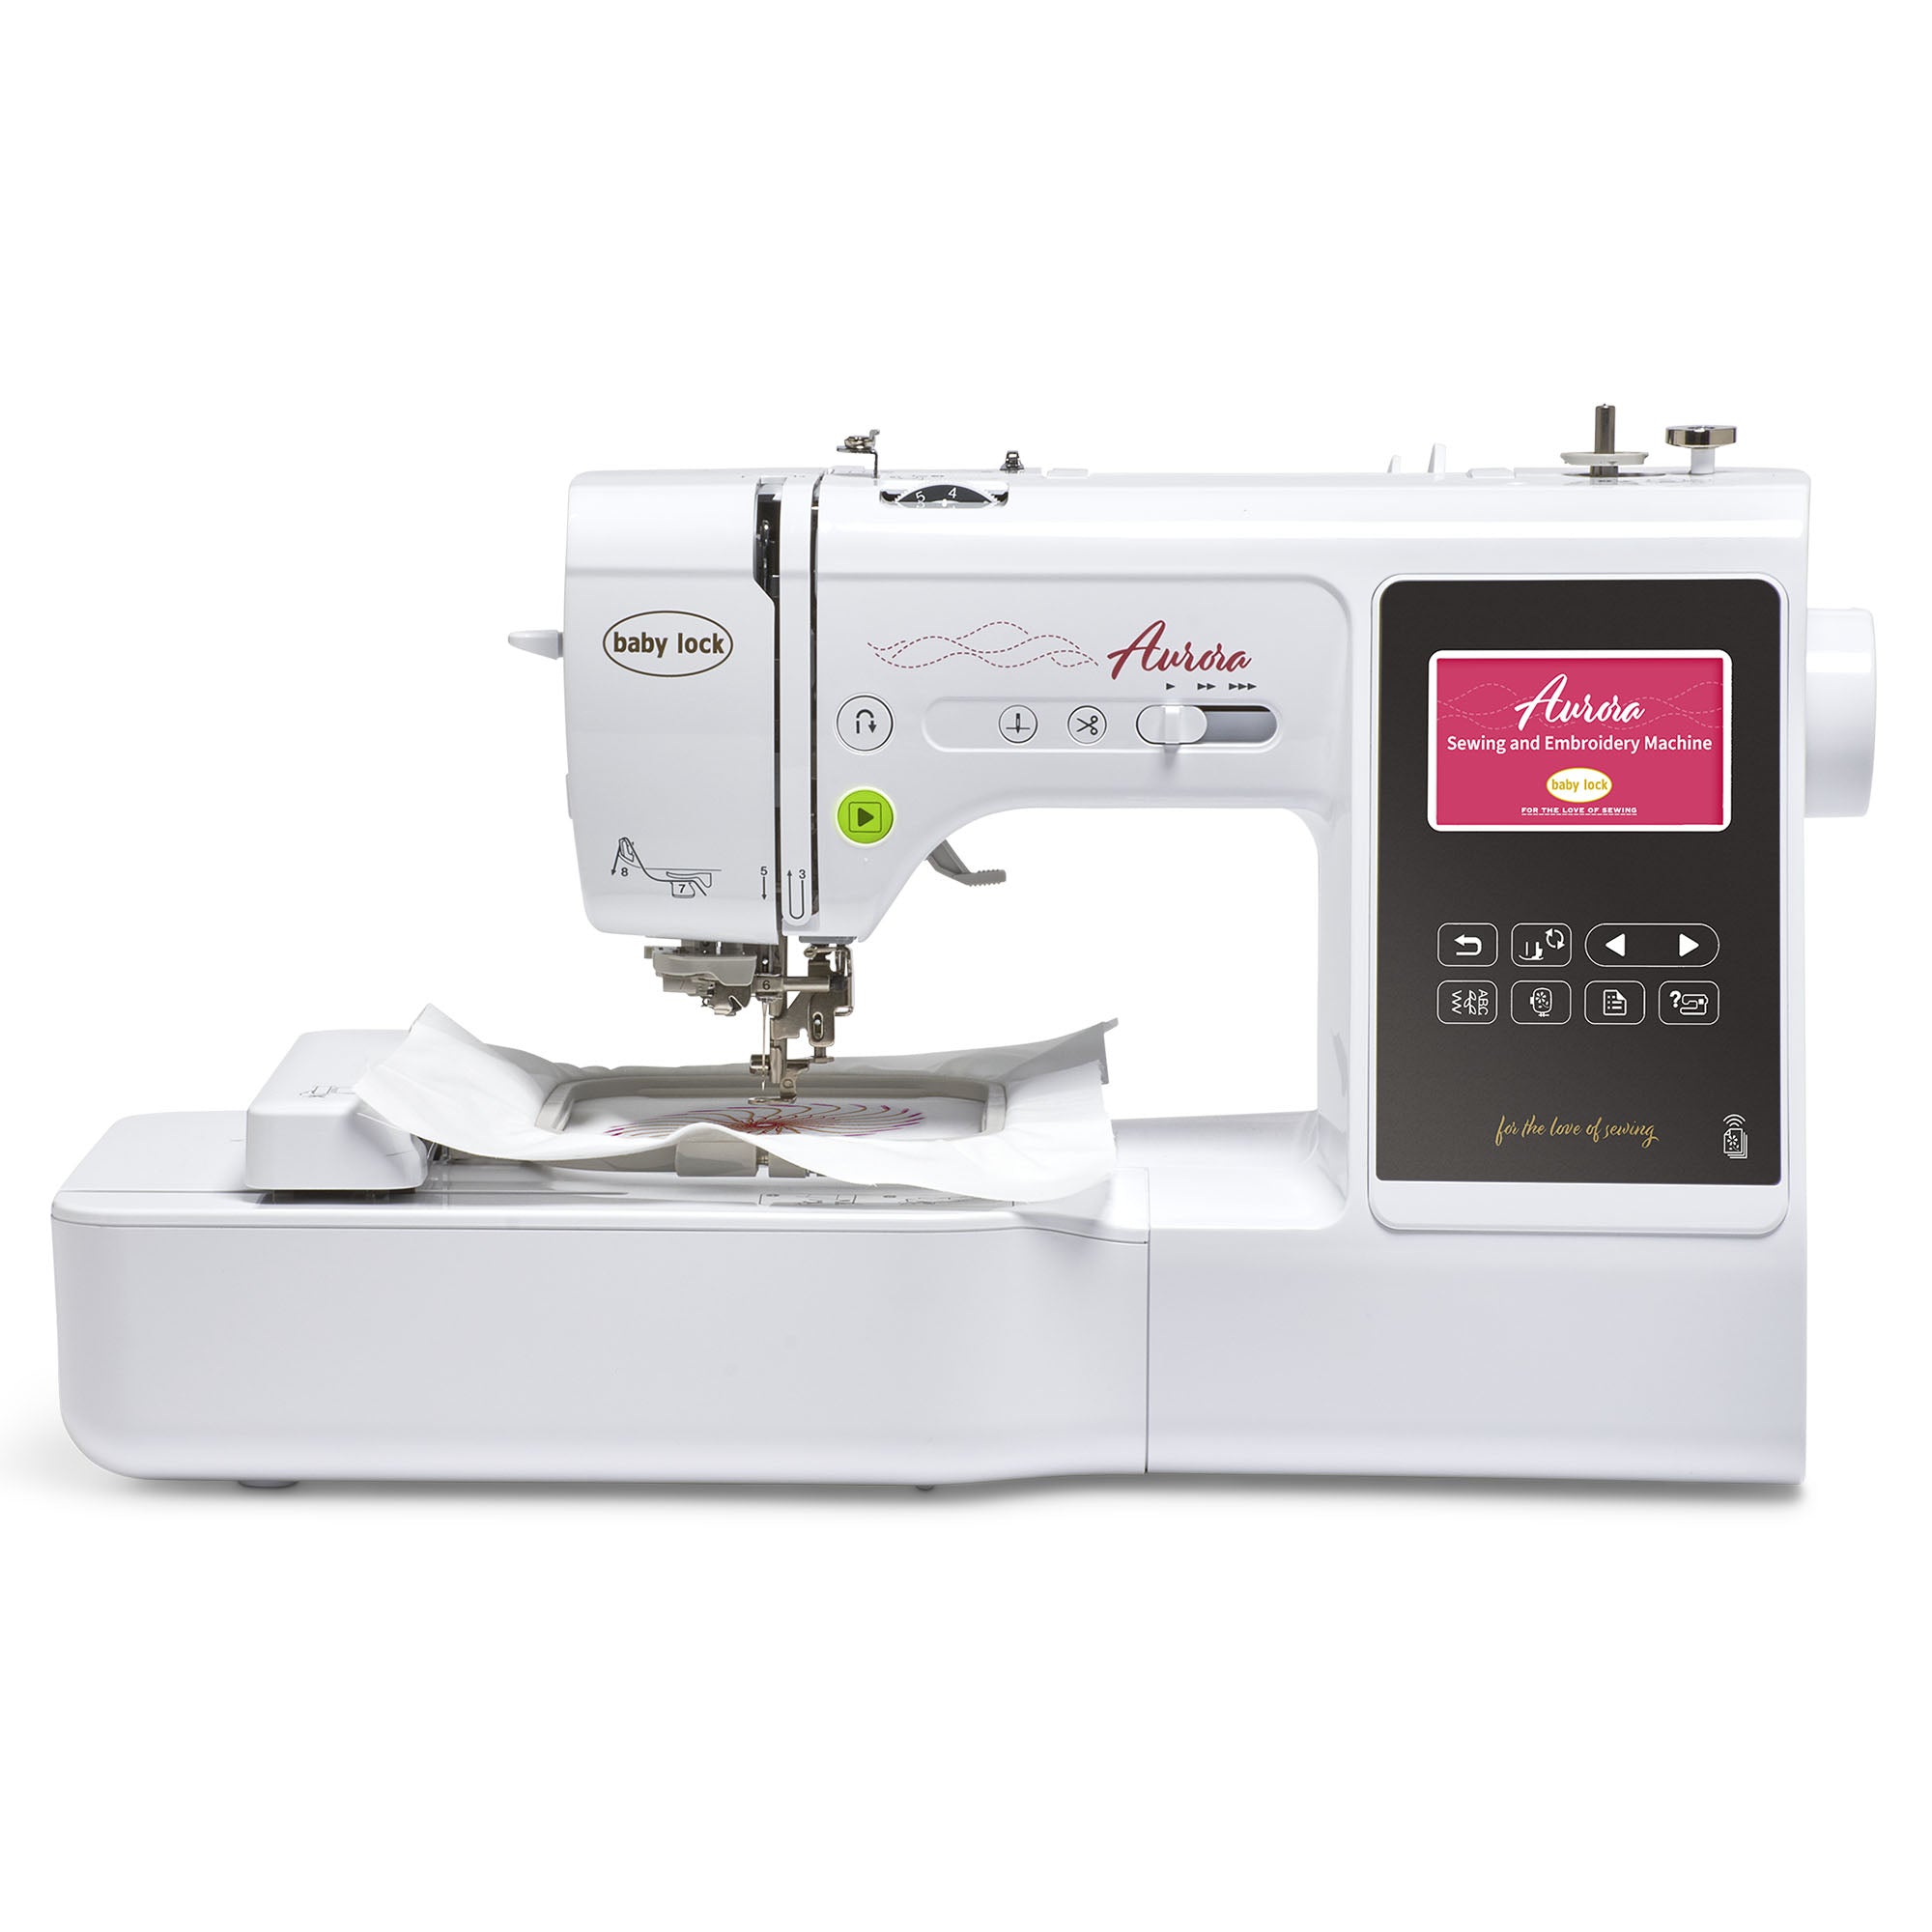 (G) Baby Lock Aurora Embroidery and Sewing Machine